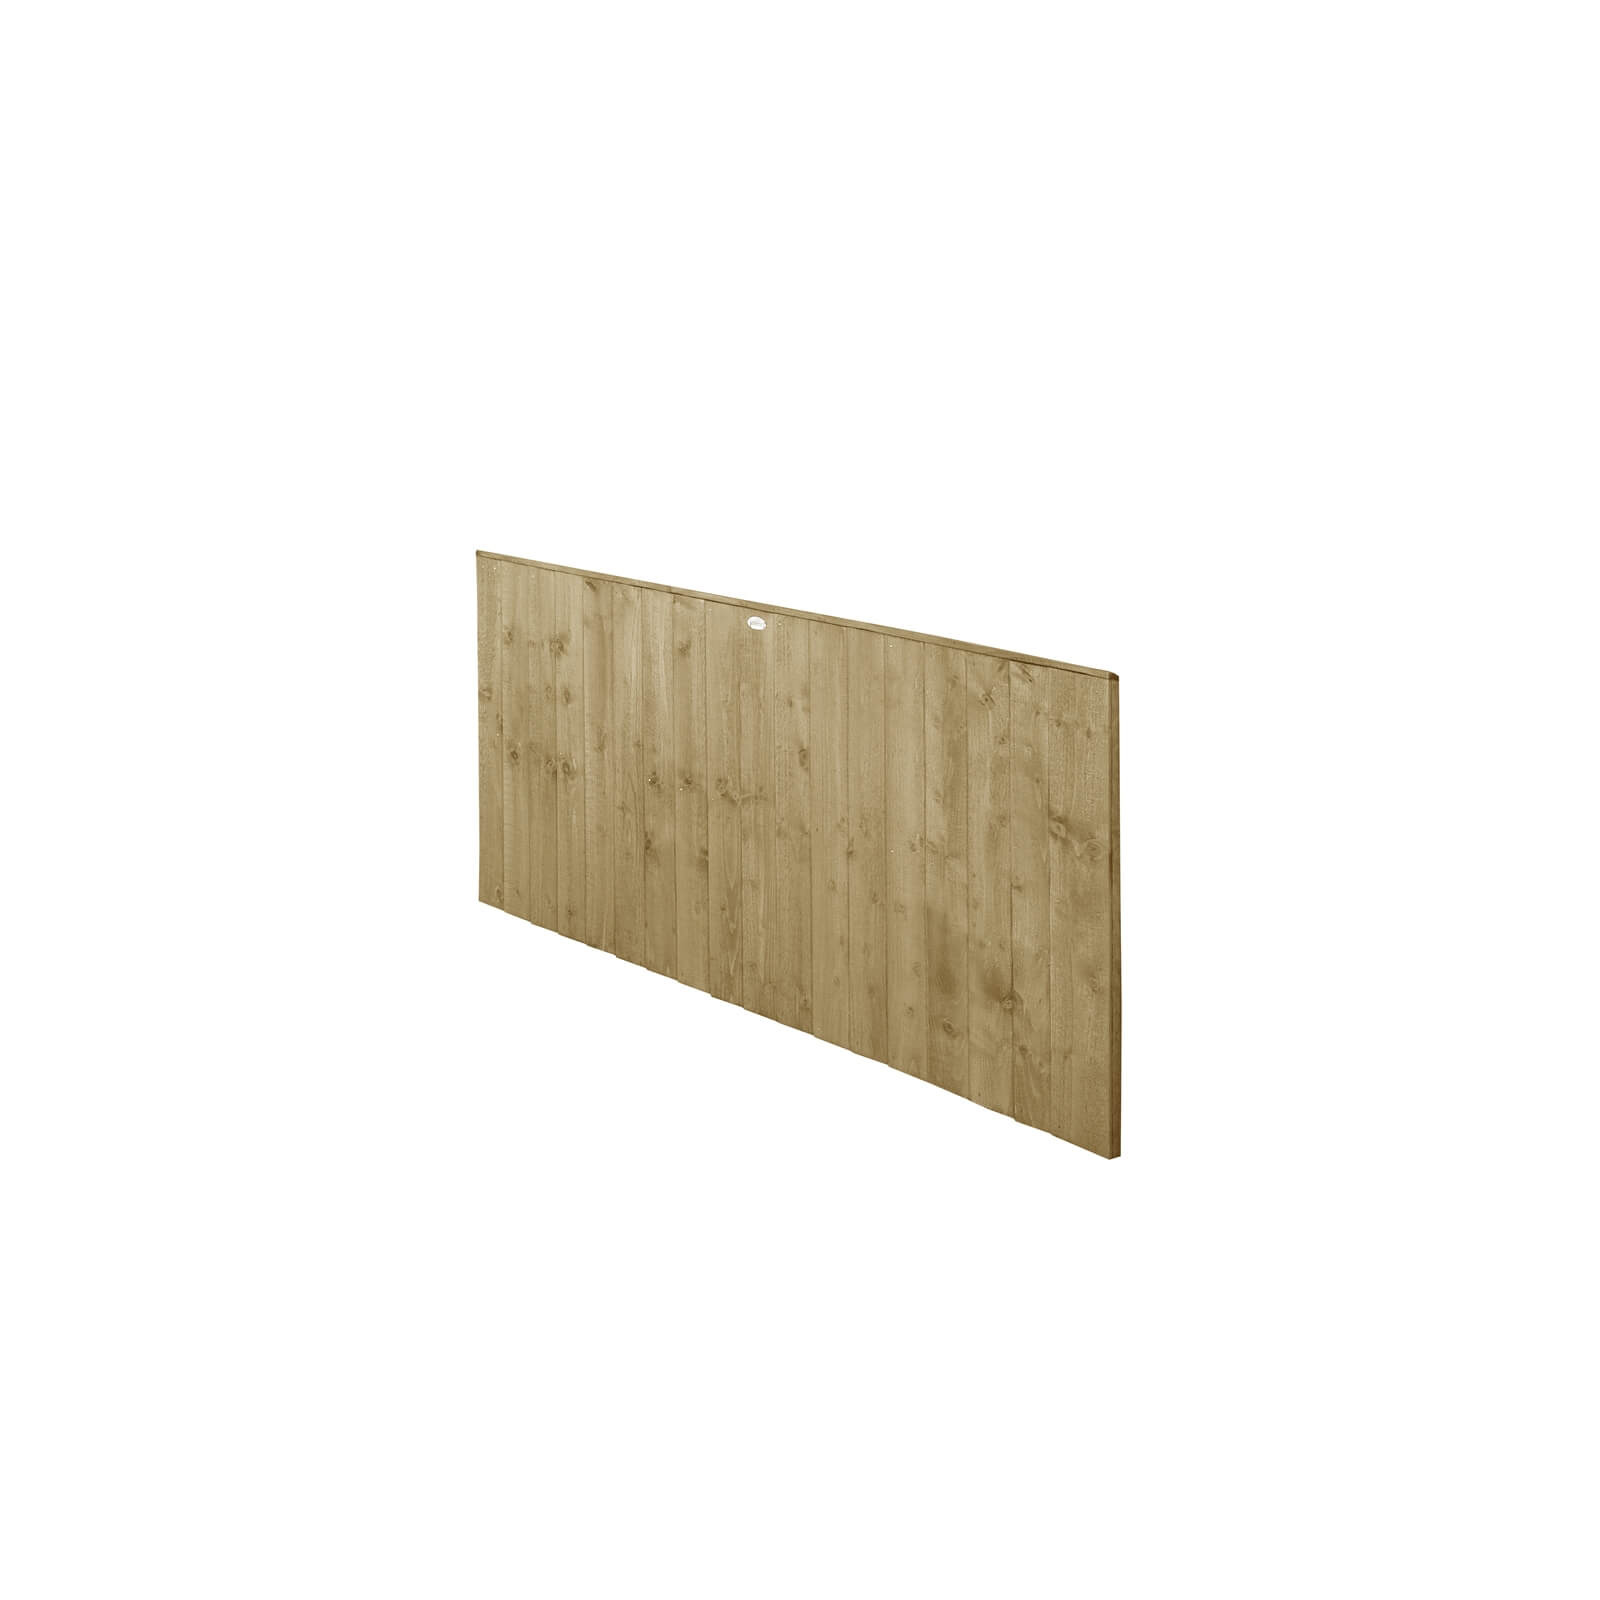 6ft x 3ft (1.83m x 0.93m) Pressure Treated Featheredge Fence Panel - Pack of 5